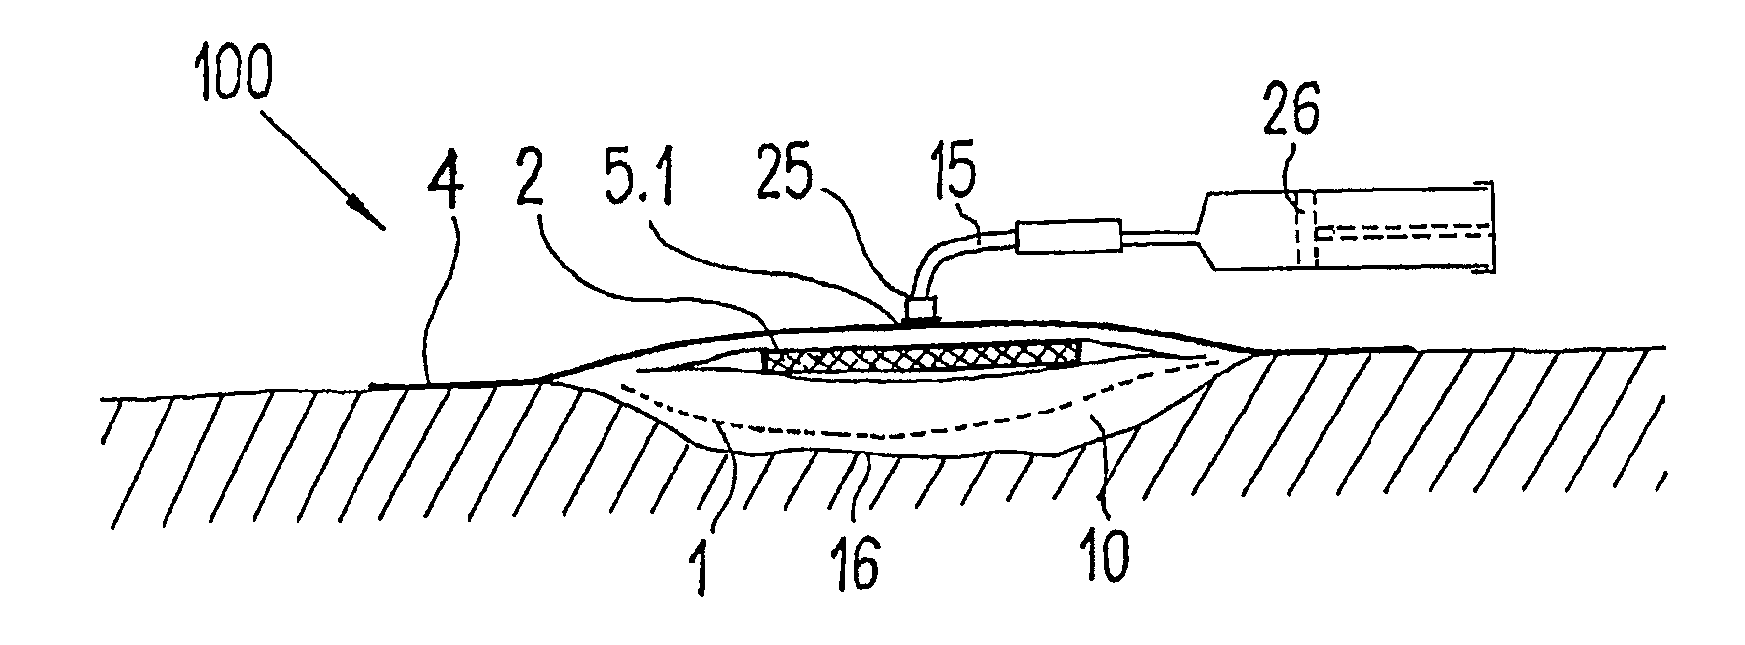 Device for the treatment of wounds using a vacuum